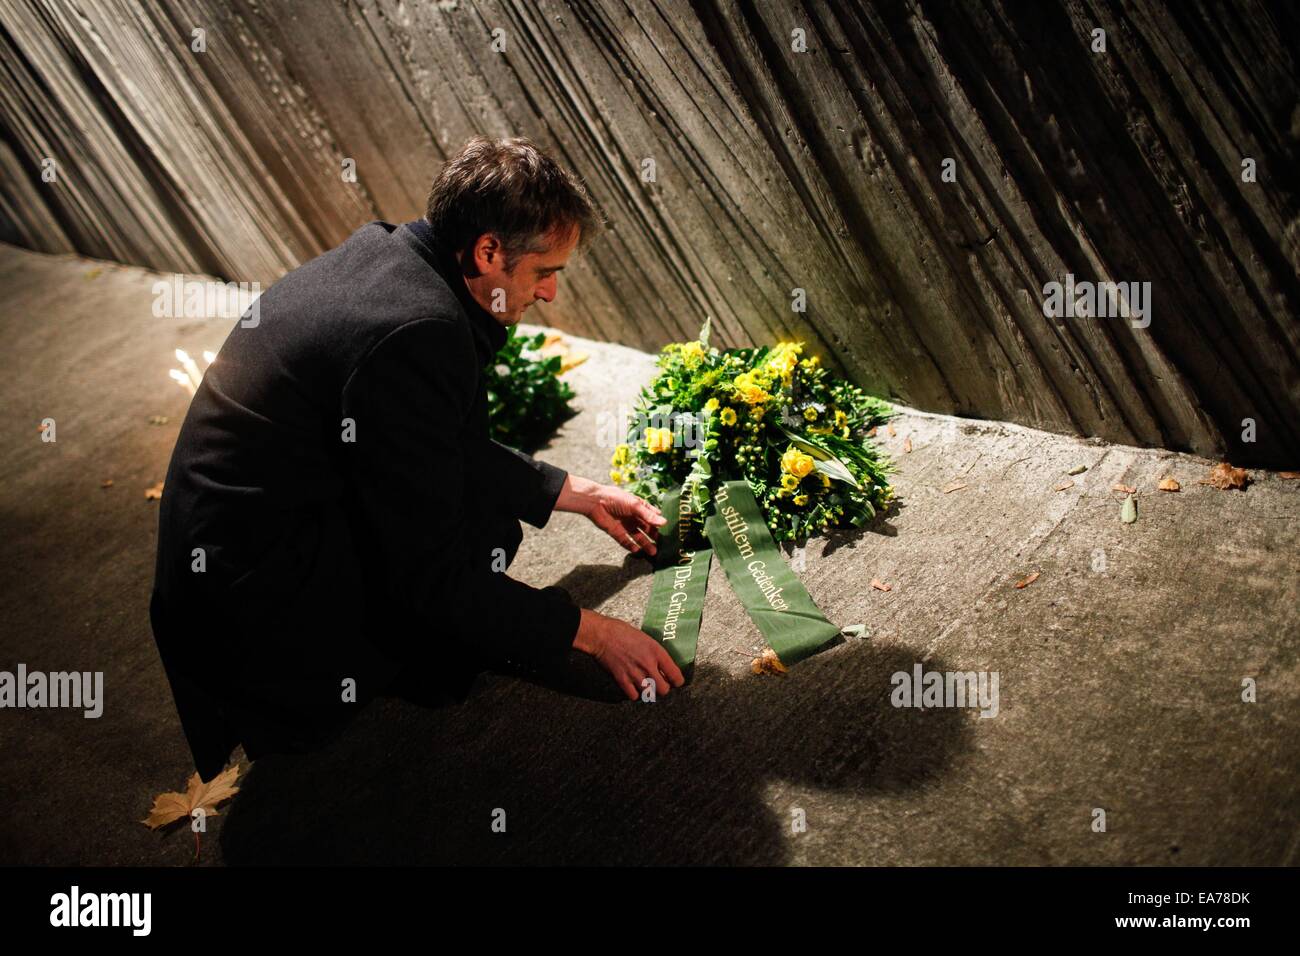 Berlin, Germany. 7th Nov, 2014. A man lays a flower wreath to a monument at Berlin's Grunewald train station during a memorial activity for the Crystal Night in Berlin, Germany, on Nov. 7, 2014. Some 100 middle school students and students from the local police school took part in the memorial activity on Friday to commemorate the 76th anniversary of the Nazi's 'Kristallnacht' (Crystal Night, Night of Broken Glass) in 1938, at Berlin's Grunewald train station, one of the major sites of deportation of the Berlin Jews during World War II. Credit:  Zhang Fan/Xinhua/Alamy Live News Stock Photo